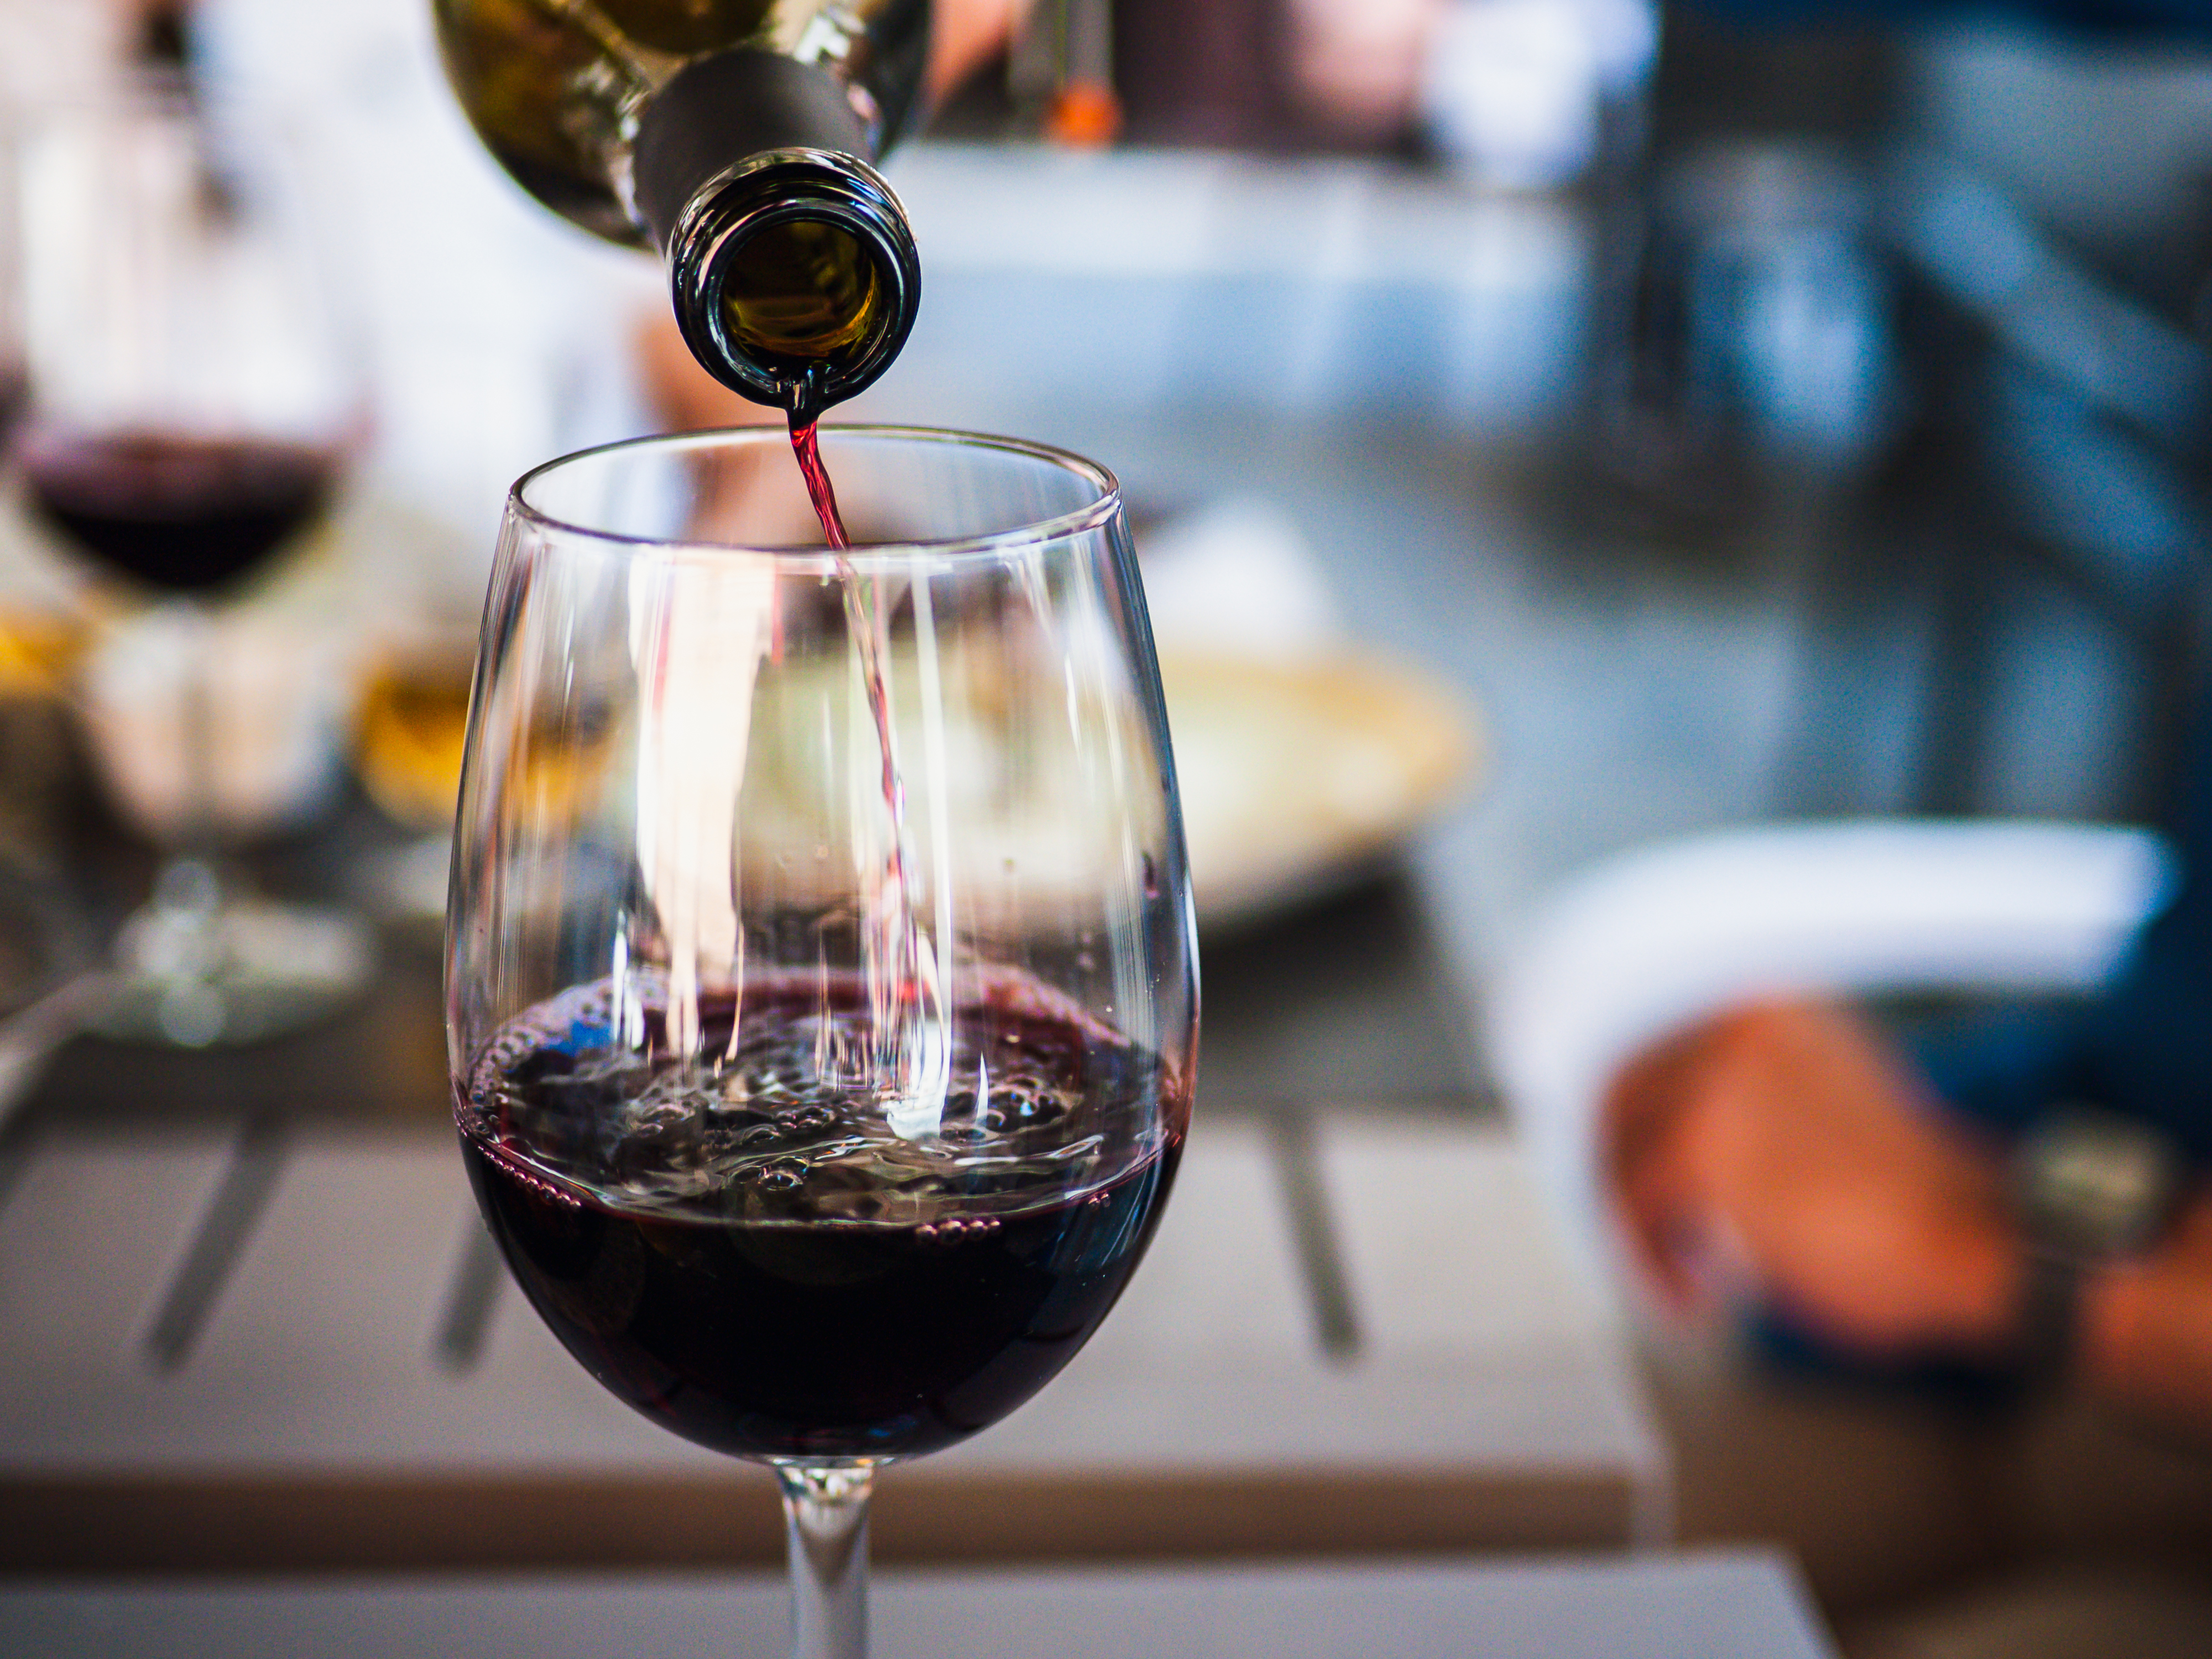 An image of someone pouring red wine in a Bordeaux wine glass.